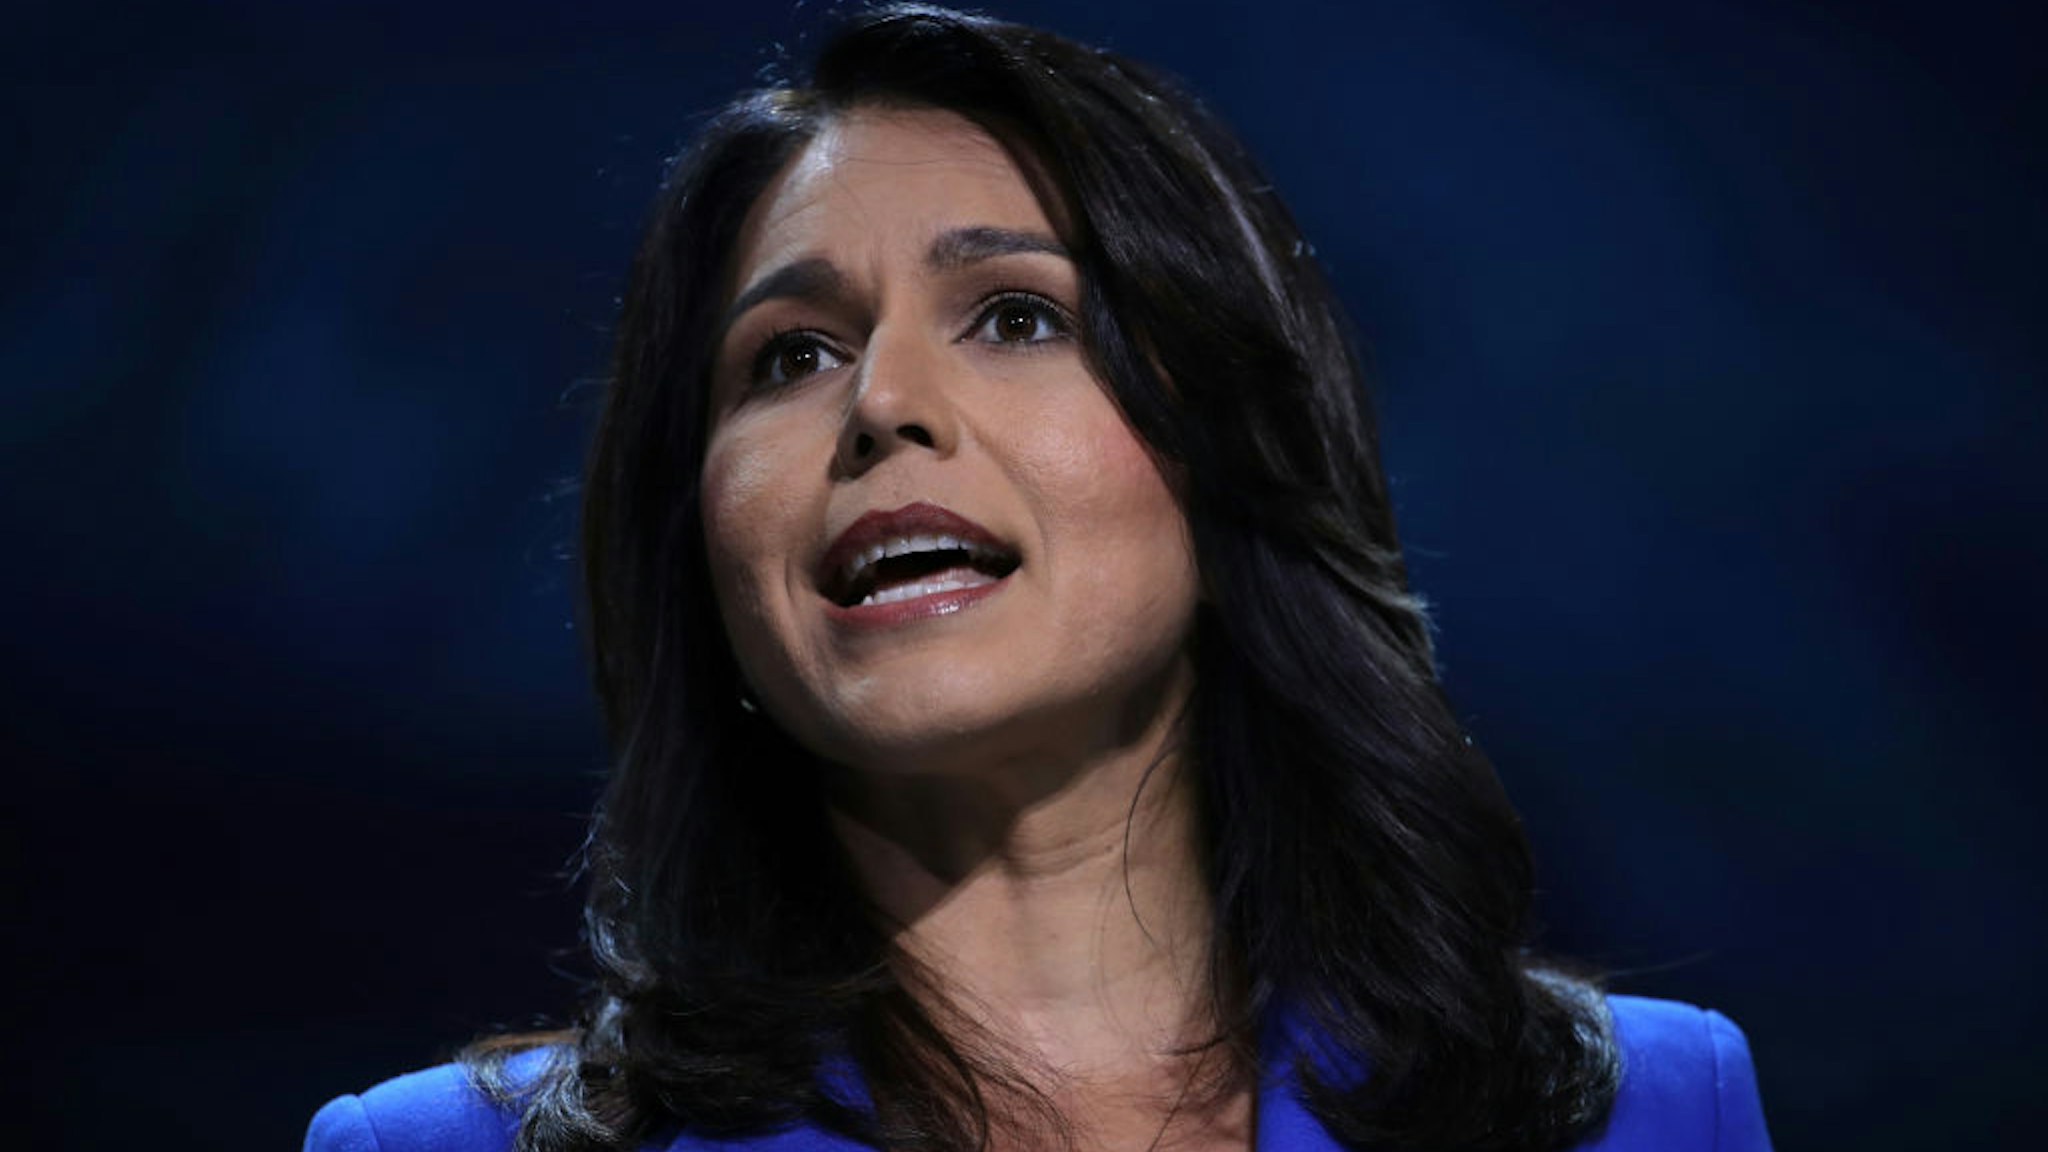 Rep. Tulsi Gabbard (D-HI) speaks during the California Democrats 2019 State Convention at the Moscone Center on June 01, 2019 in San Francisco, California.